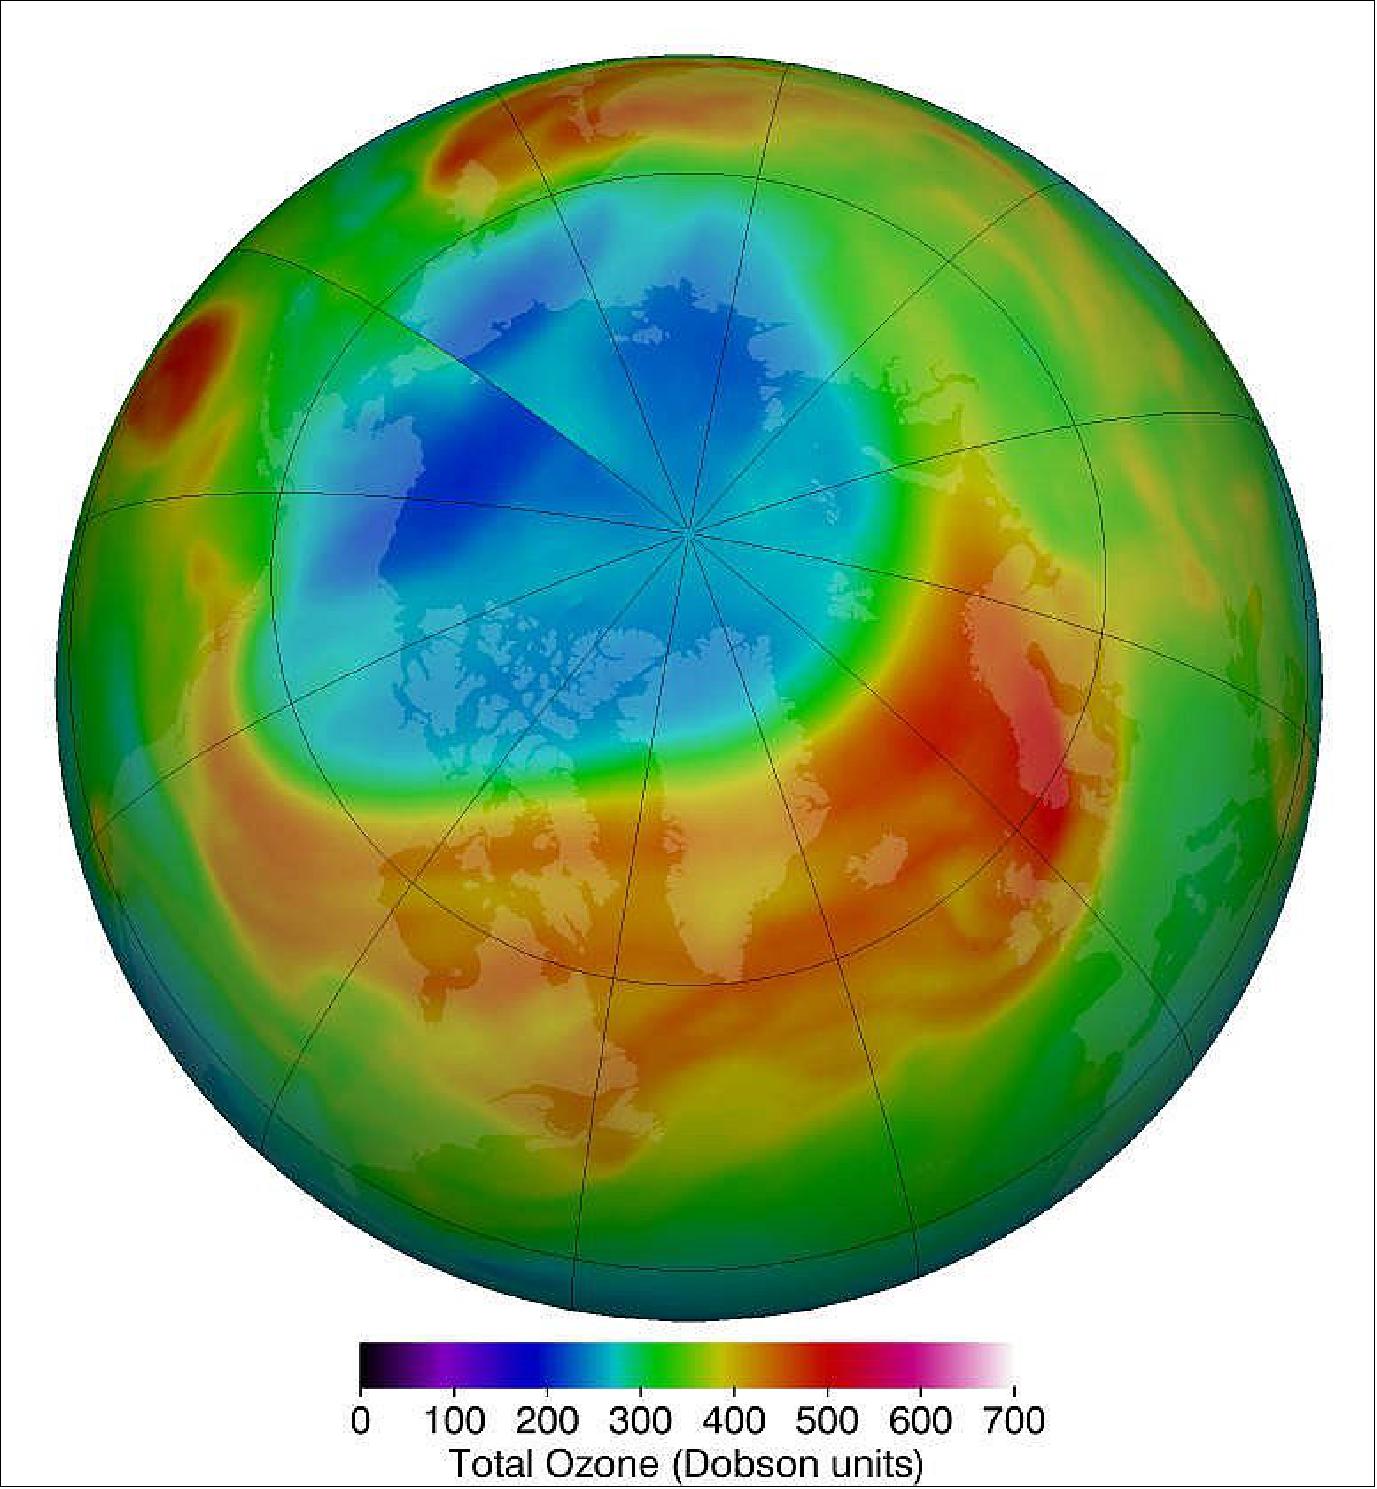 Figure 17: Arctic stratospheric ozone reached its record low level of 205 Dobson units, shown in blue and turquoise, on March 12, 2020 (image credit: NASA/GSFC)